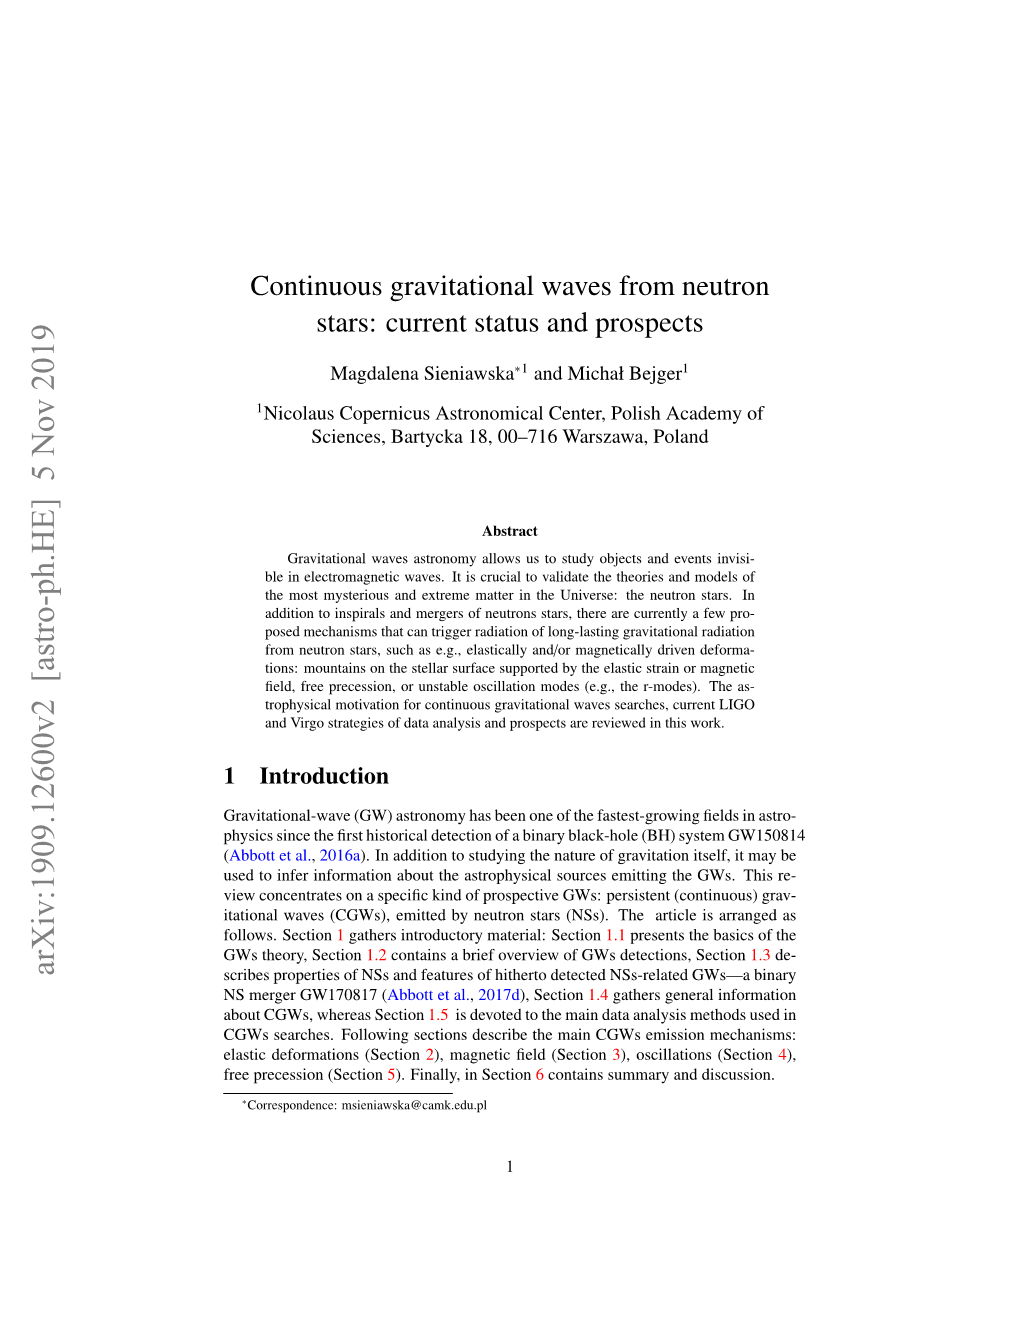 Continuous Gravitational Waves from Neutron Stars: Current Status and Prospects